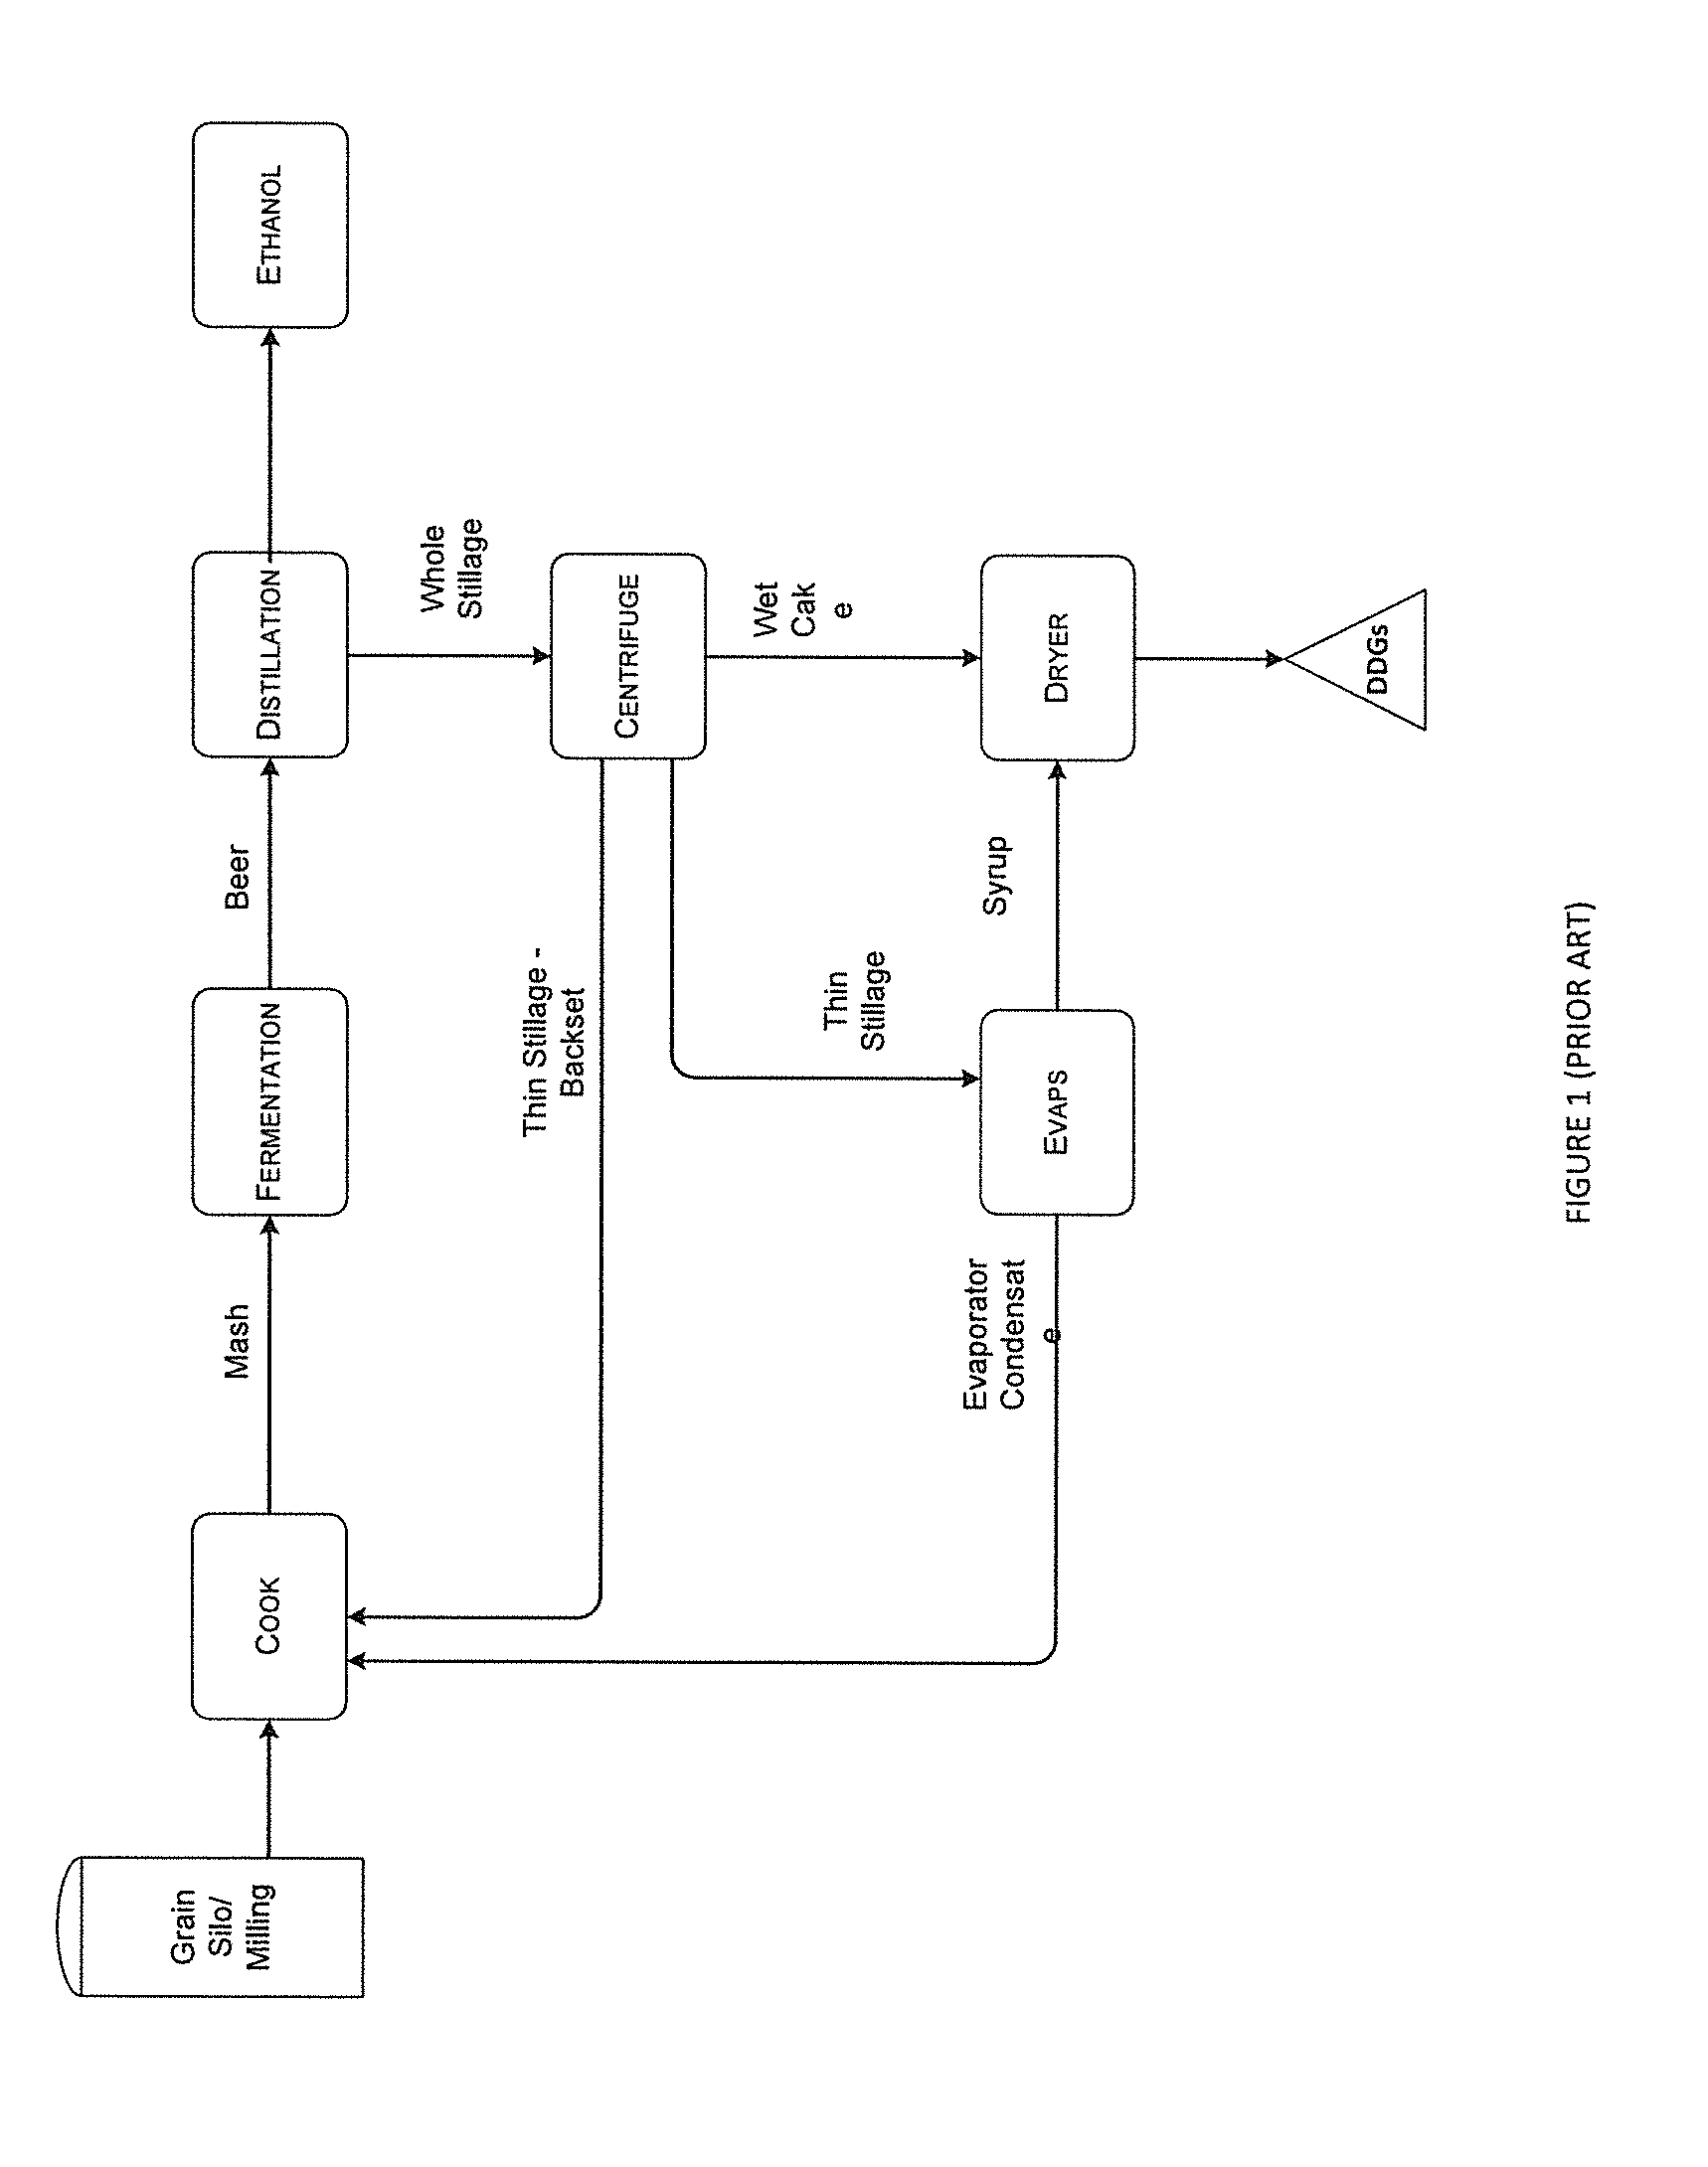 Methods for managing the composition of distillers grain co-products